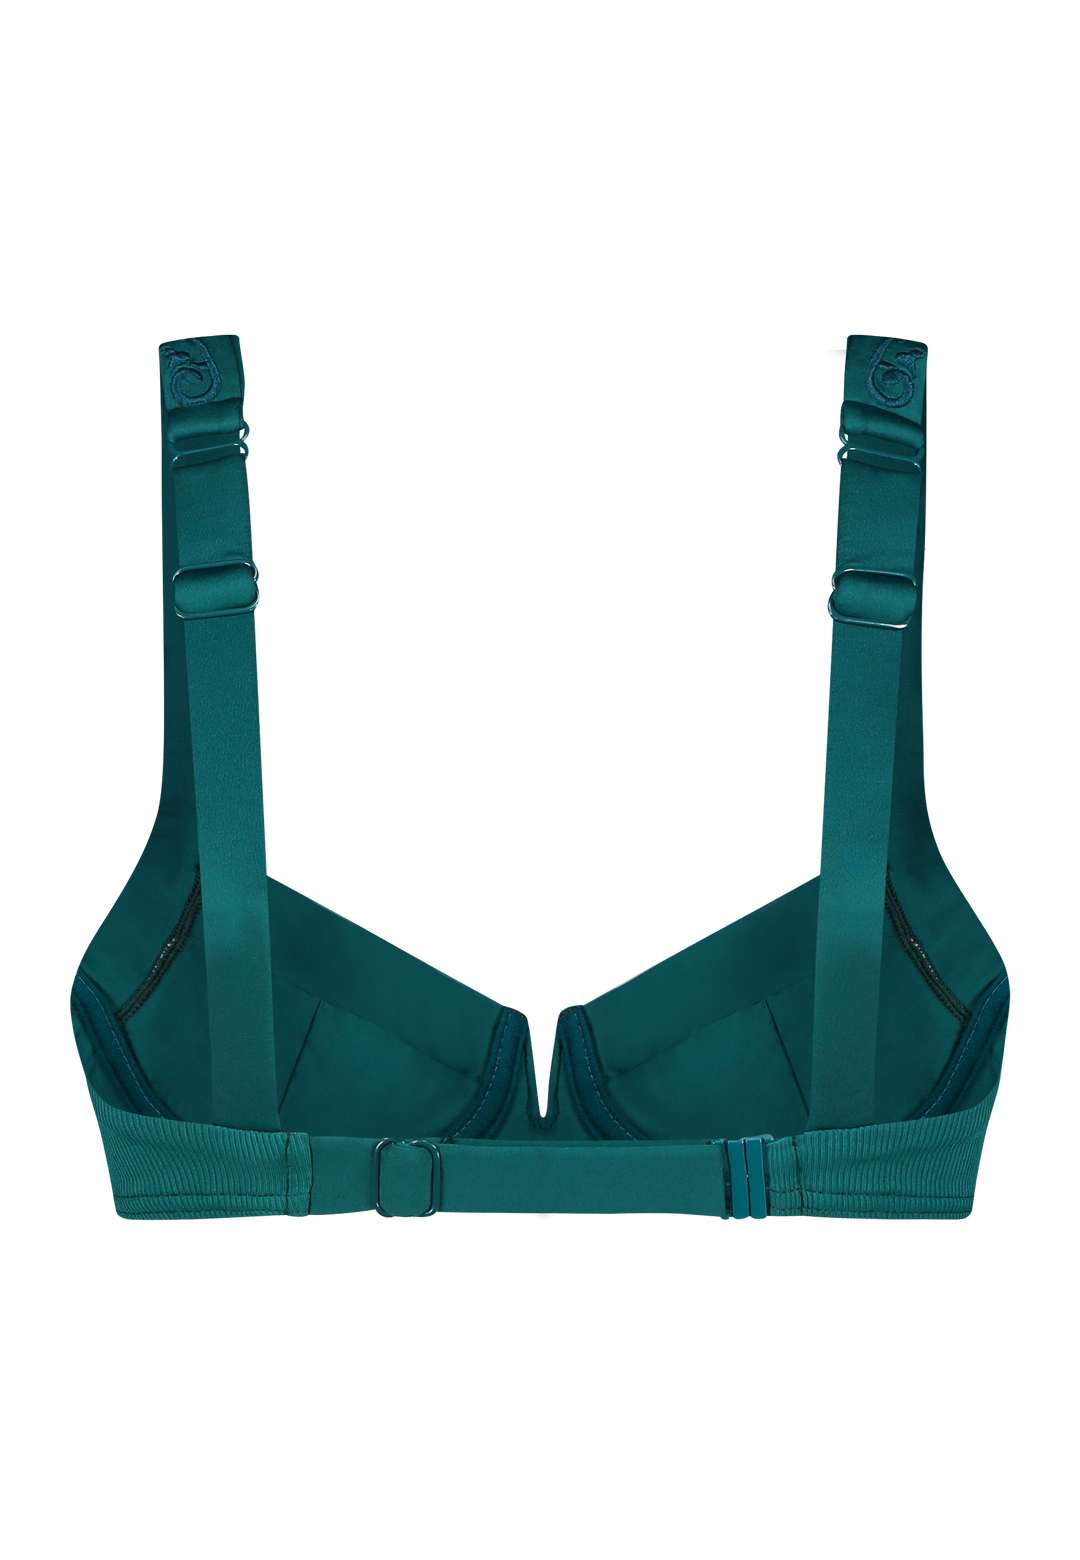 Bikini top with underwire in green with adjustable band size and shoulder straps